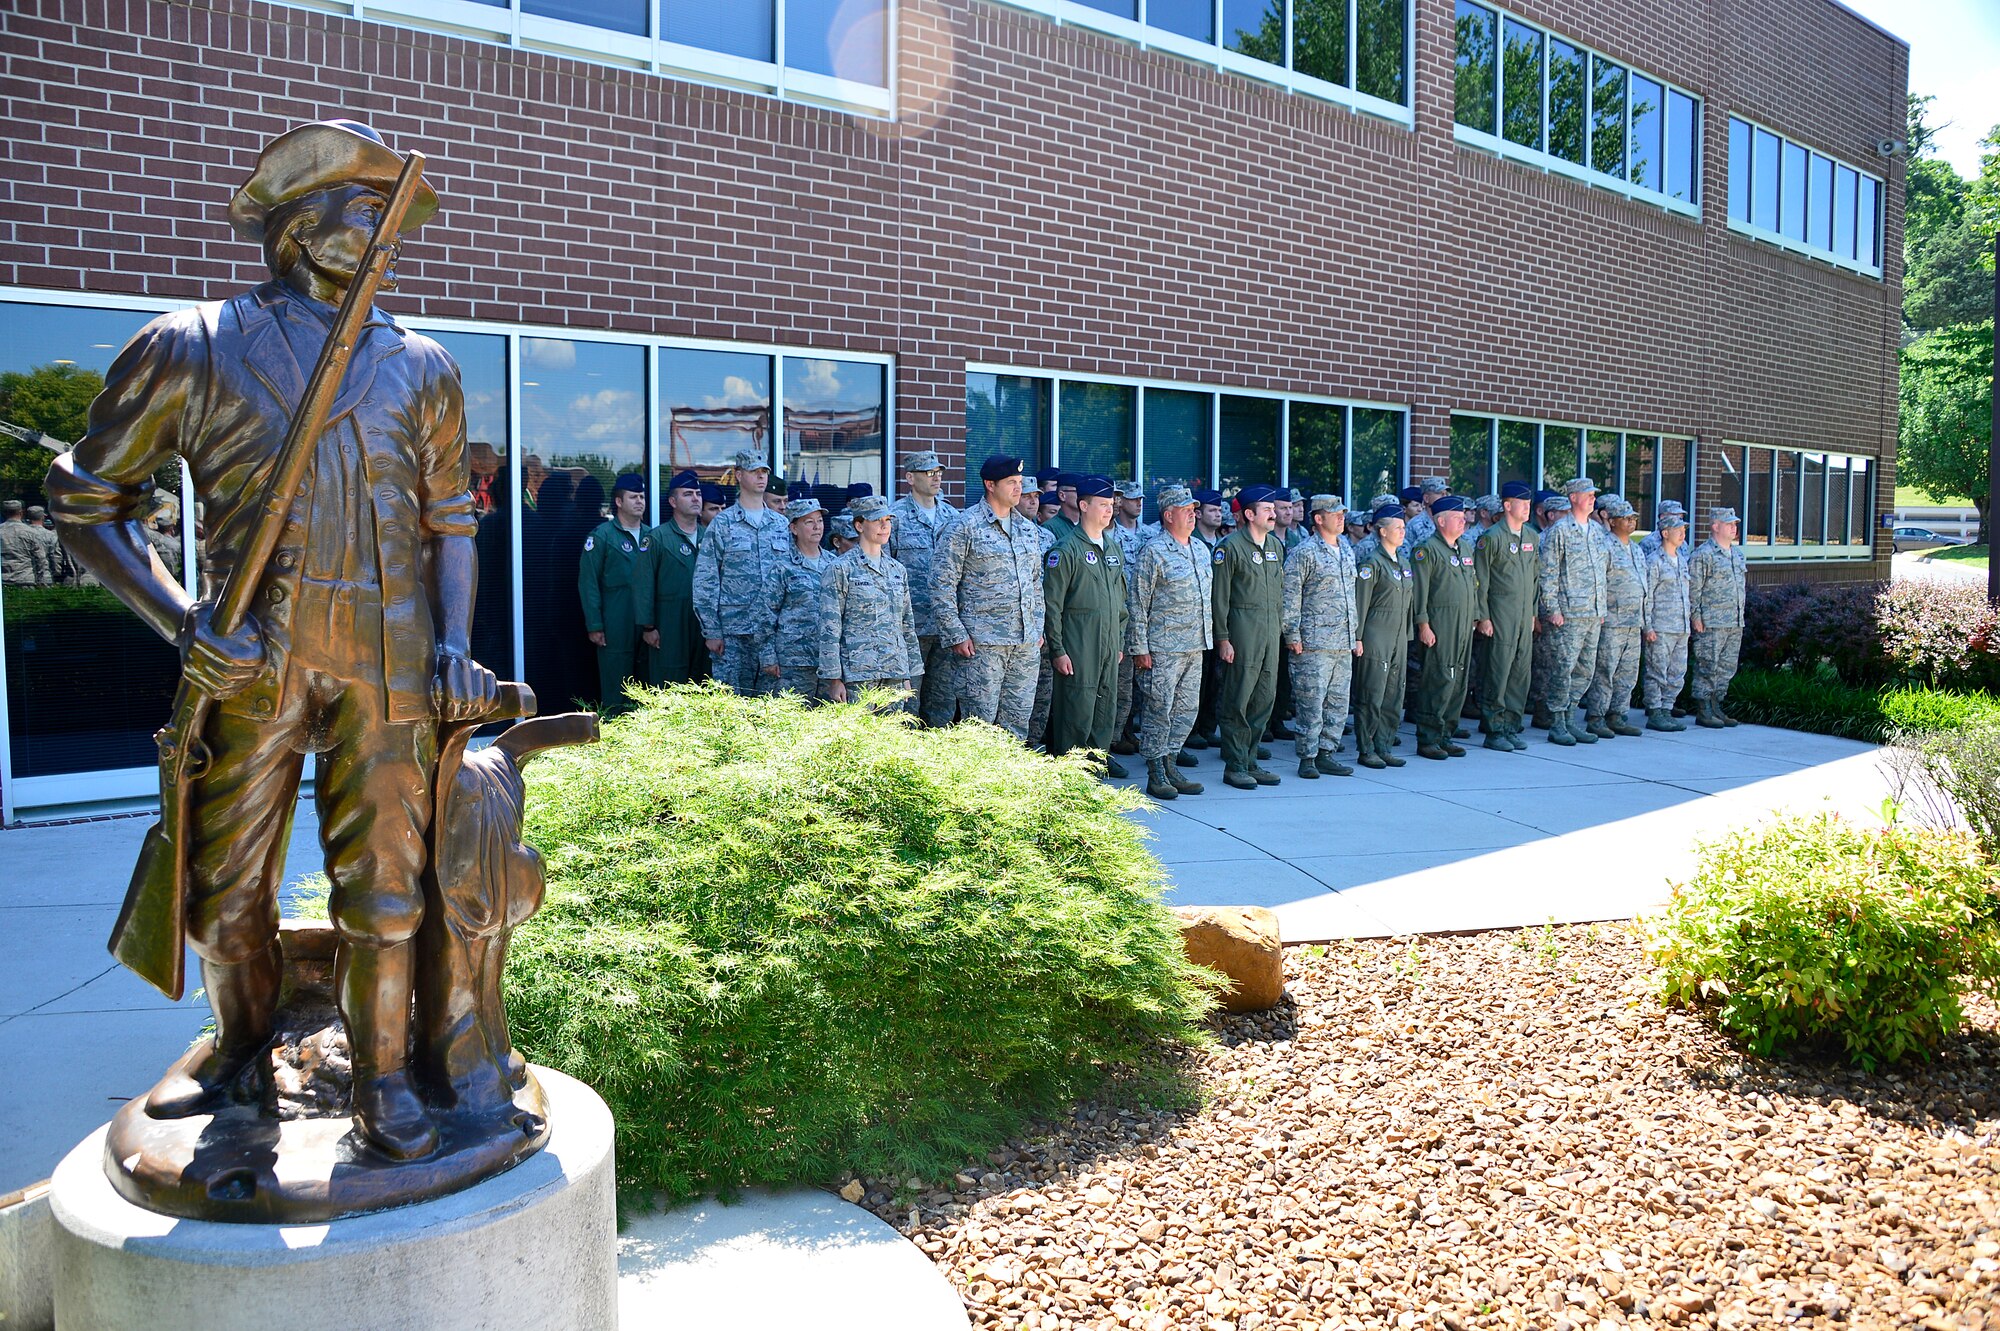 MCGHEE TYSON AIR NATIONAL GUARD BASE, Tenn. - More than 60 lieutenant colonels at the I.G. Brown Training and Education Center here, June 4, 2015, form up with NCO academy students, instructors and staff for the day's retreat. The officers were part of the AWC's fourth seminar on campus for the Air National Guard and Air Force Reserve Command, which included one Marine Corps officer in attendance. (U.S. Air National Guard photo by Master Sgt. Mike R. Smith/Released) 